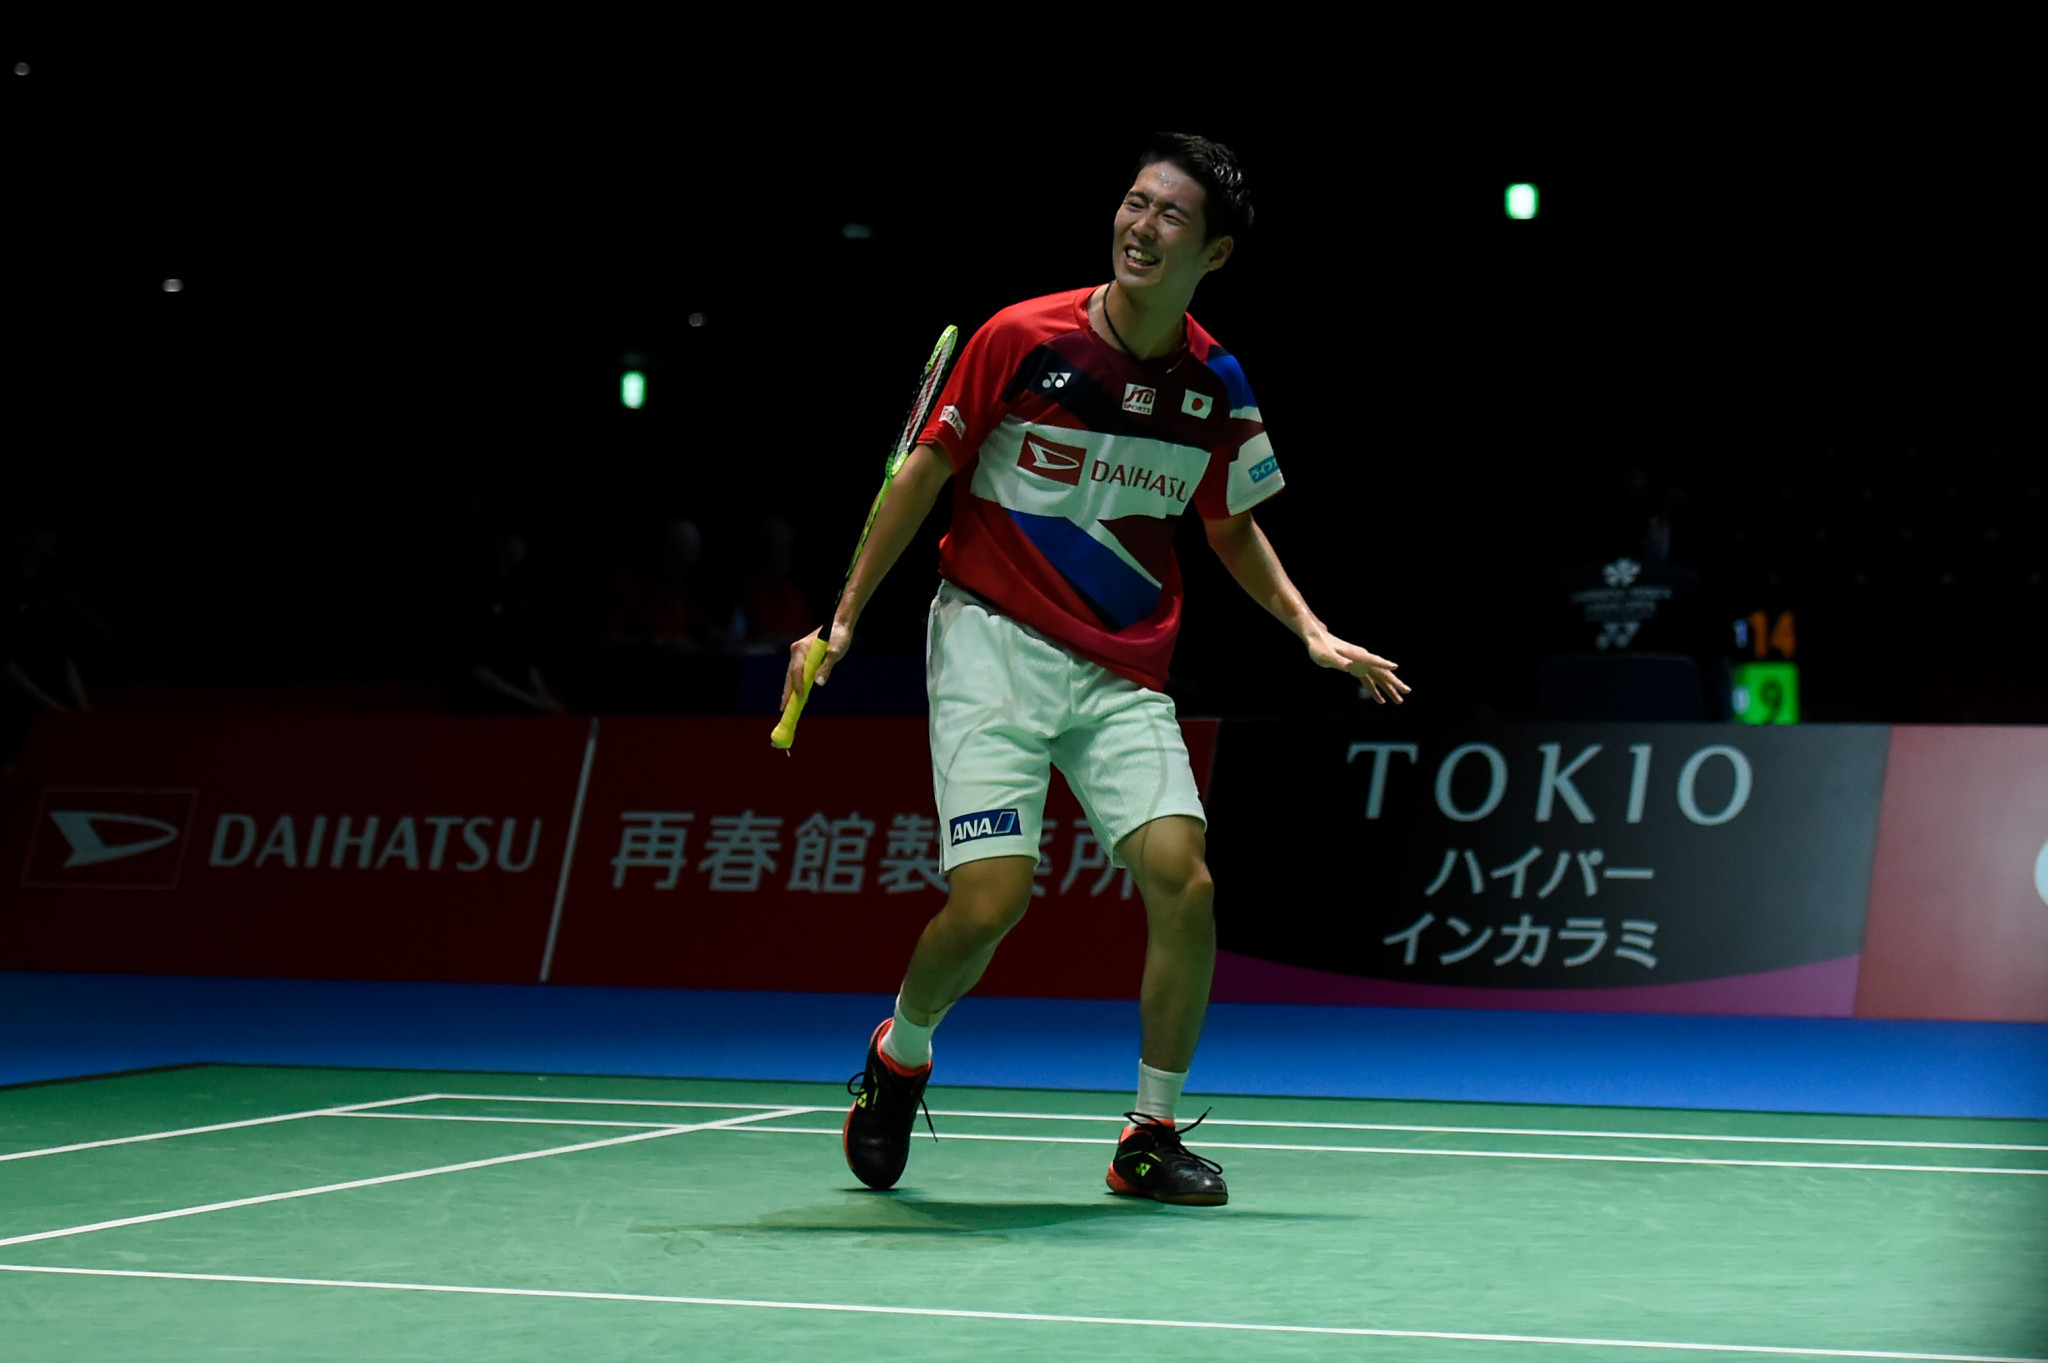 Olympic champion knocked out as badminton's Tokyo 2020 test event begins